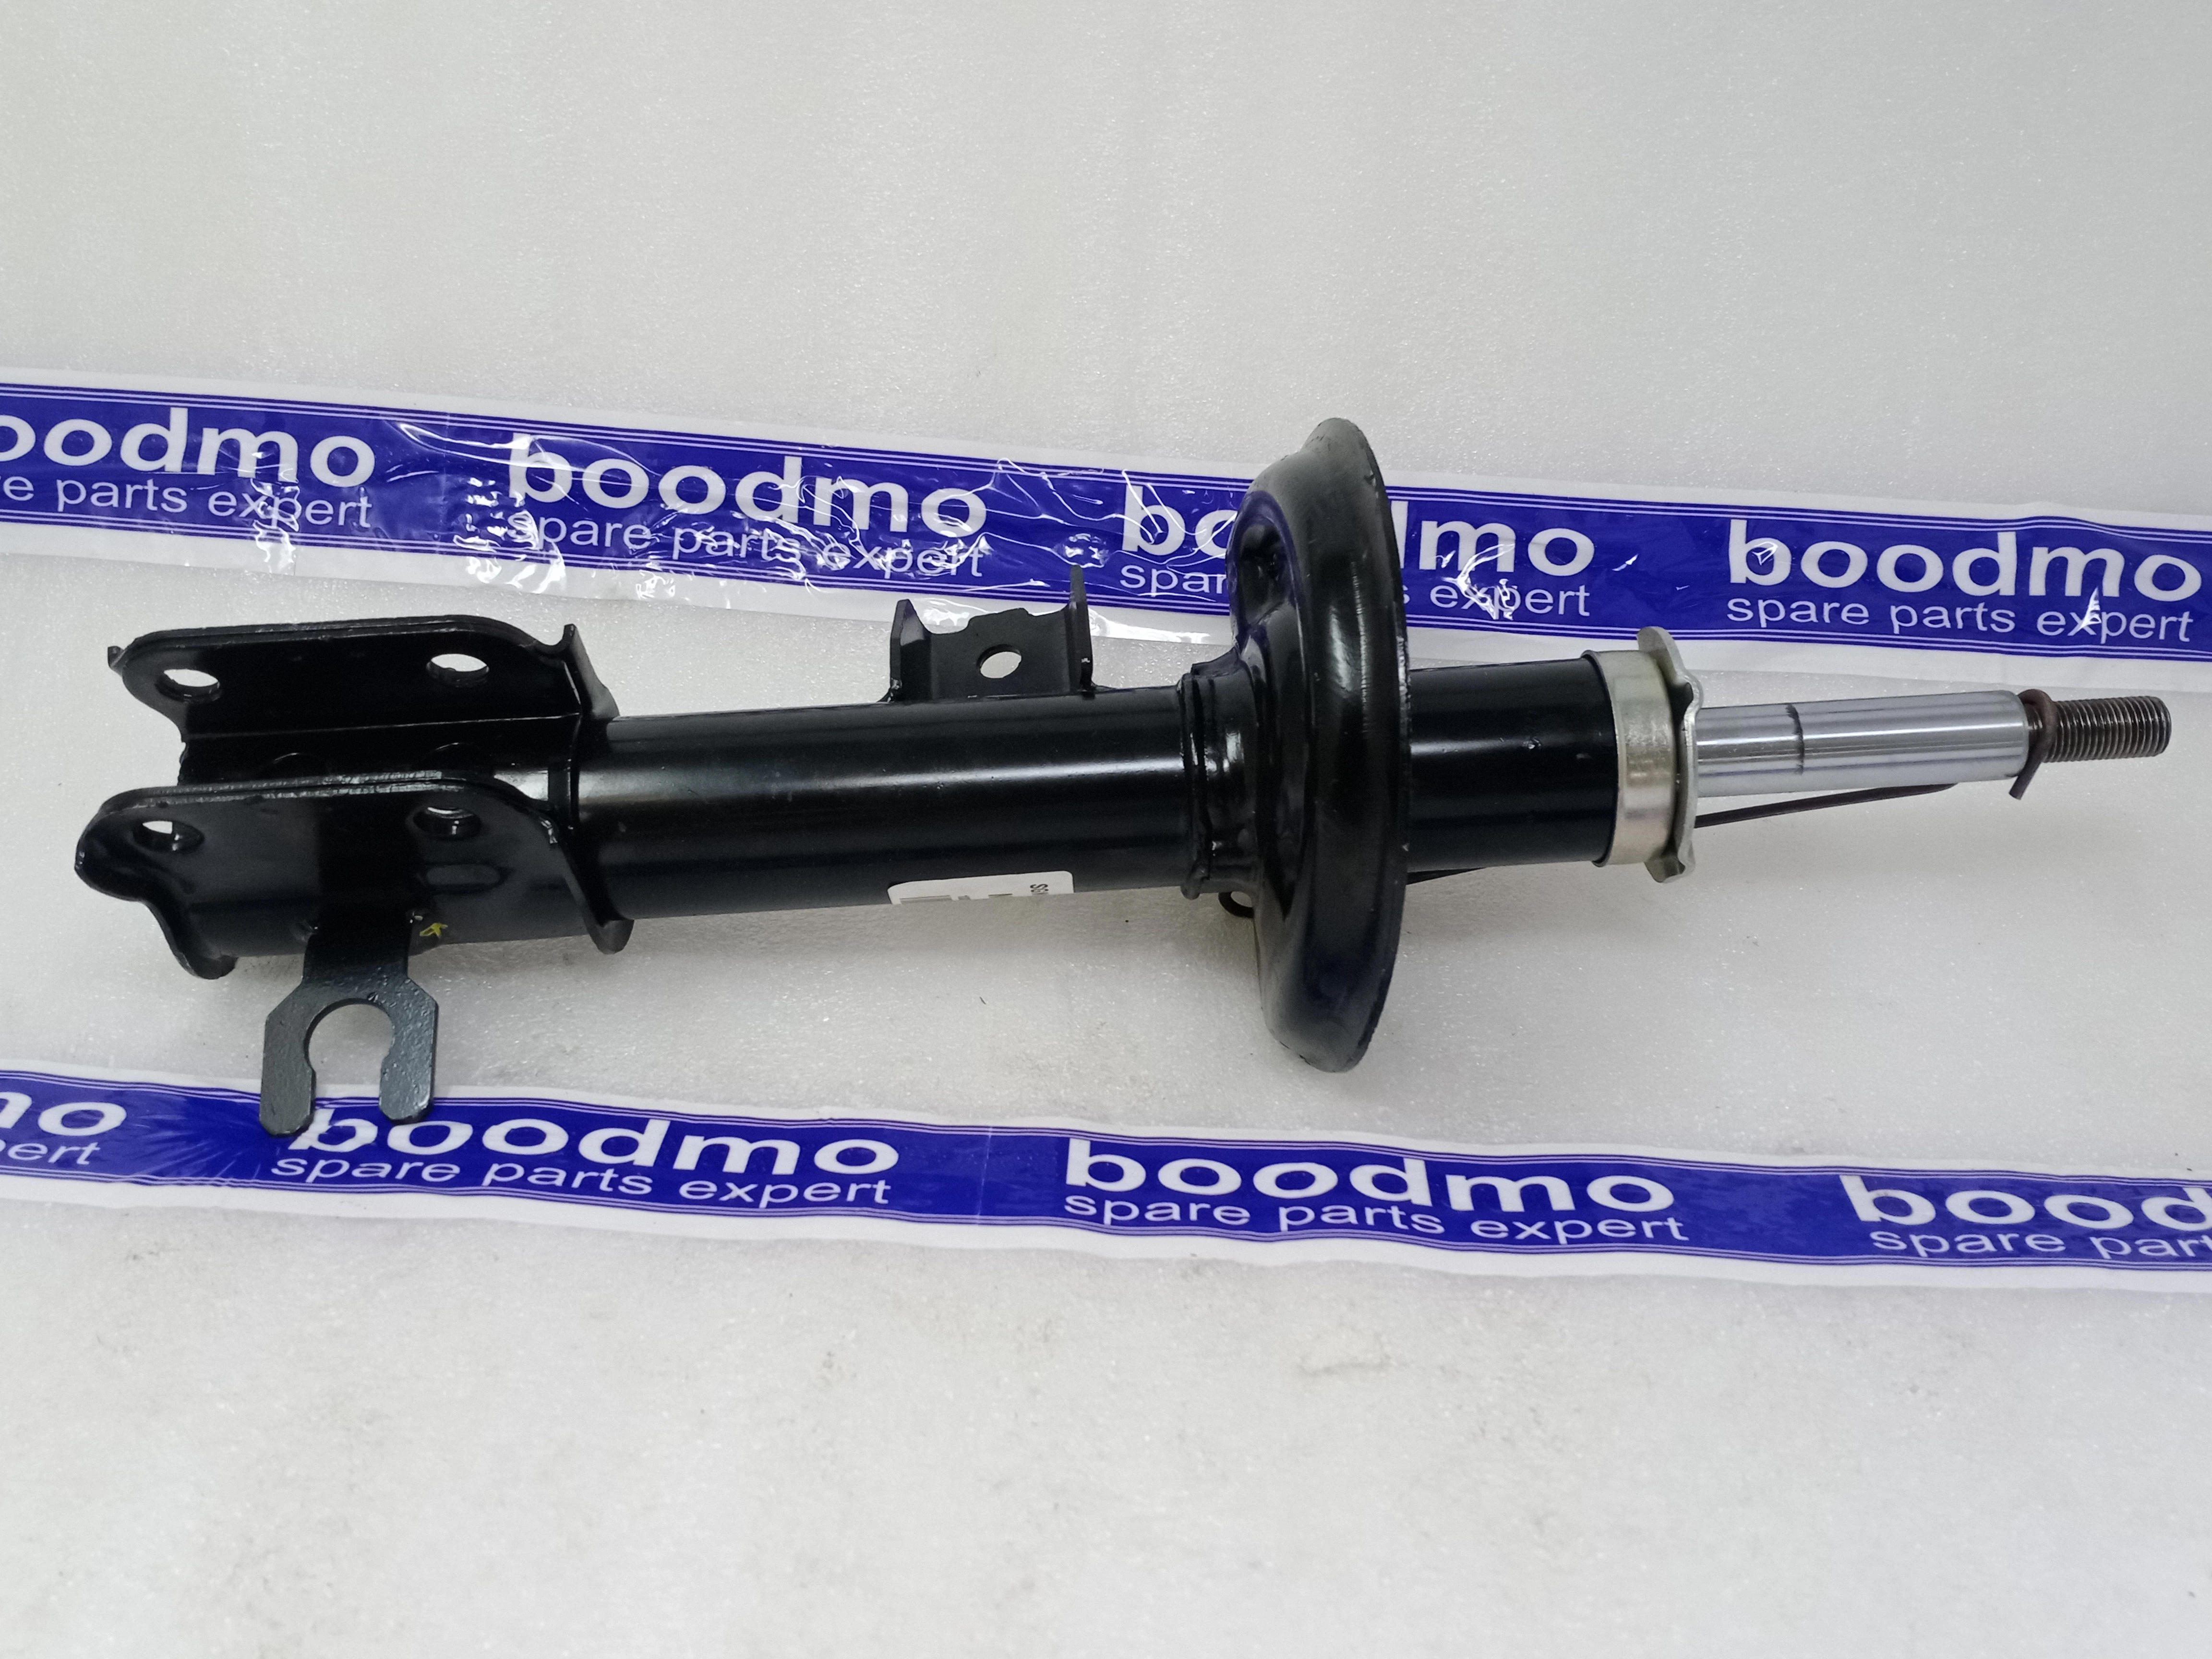 Front Suspension Strut Right: Mark Xtralife SGM13-103 -compatibility,  features, prices. boodmo